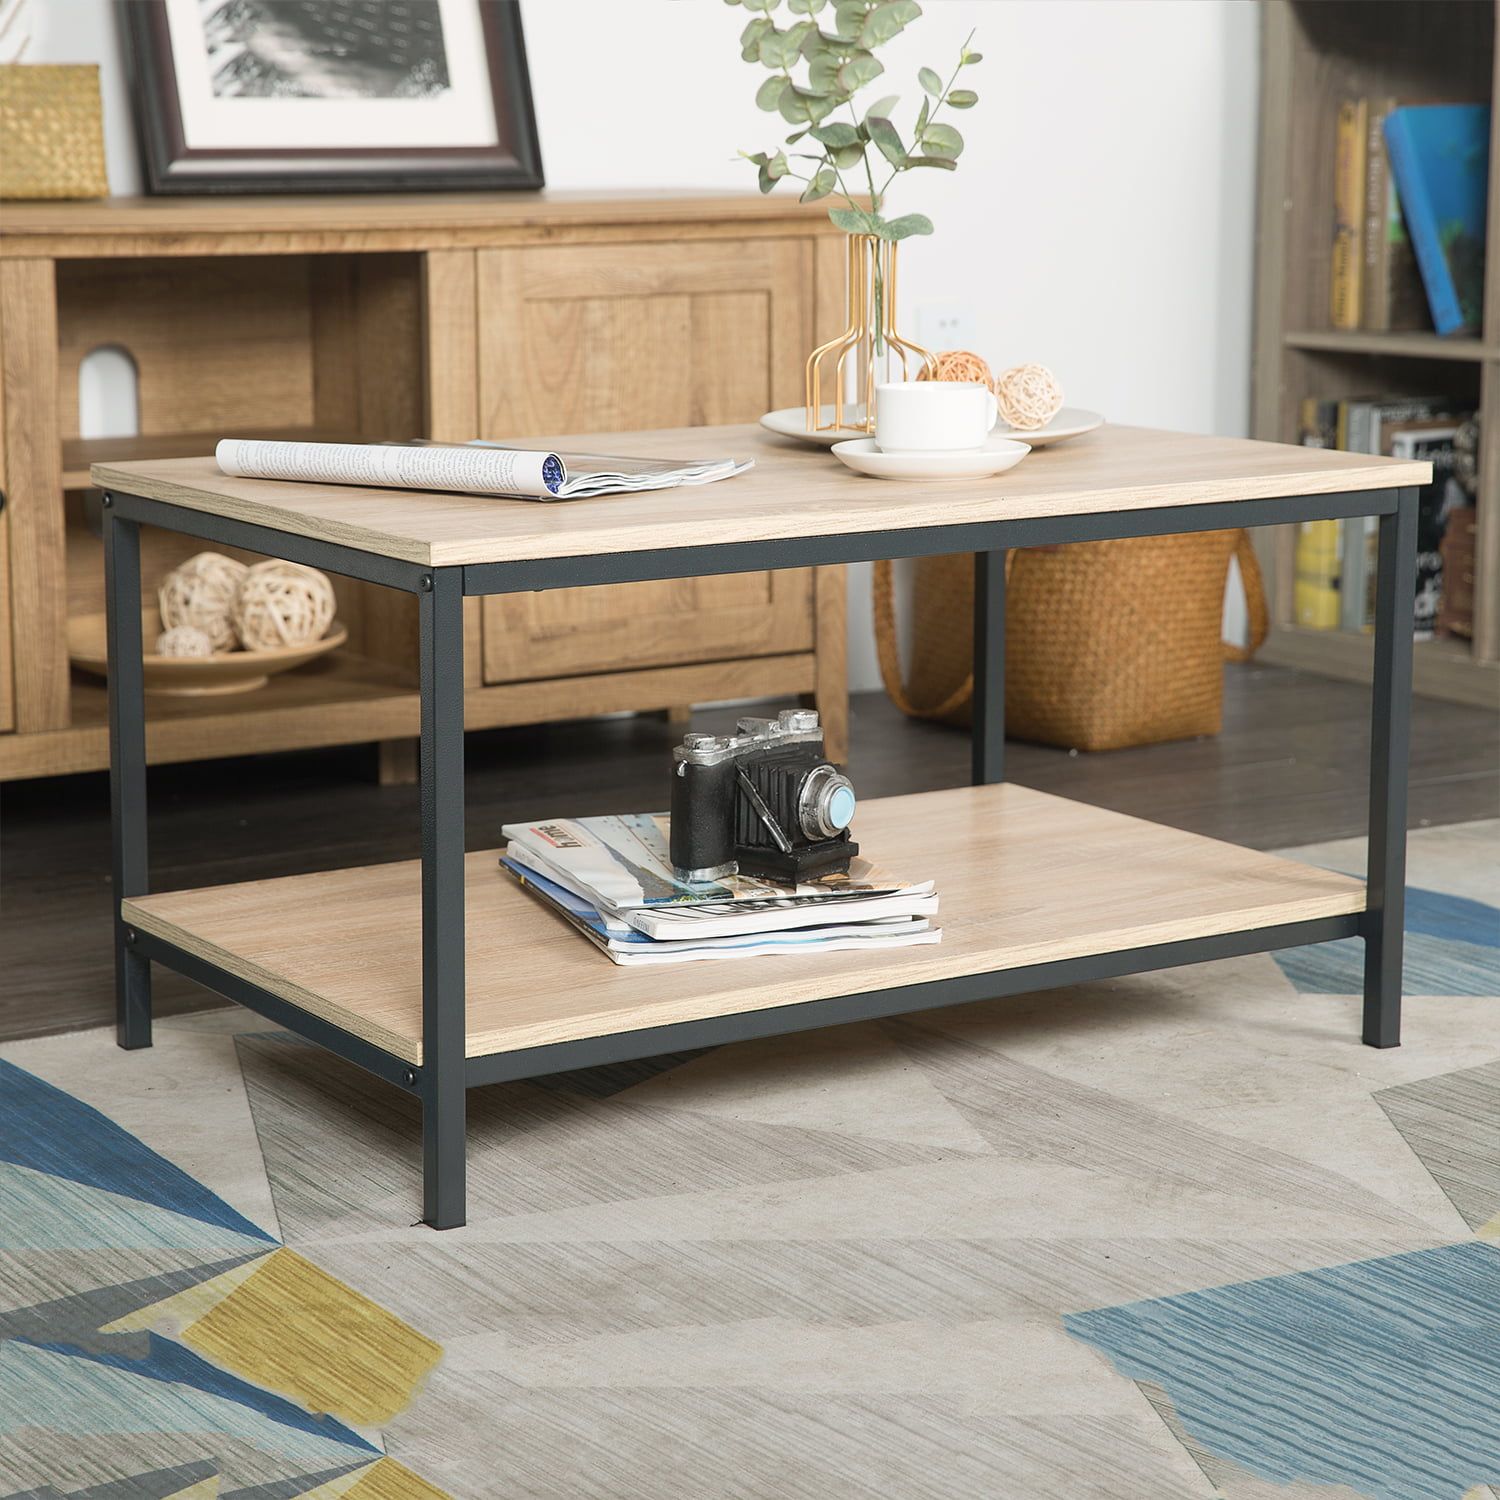 Finefind Modern Industrial Metal Rectangular Coffee Table With Storage With Metal 1 Shelf Coffee Tables (View 14 of 20)